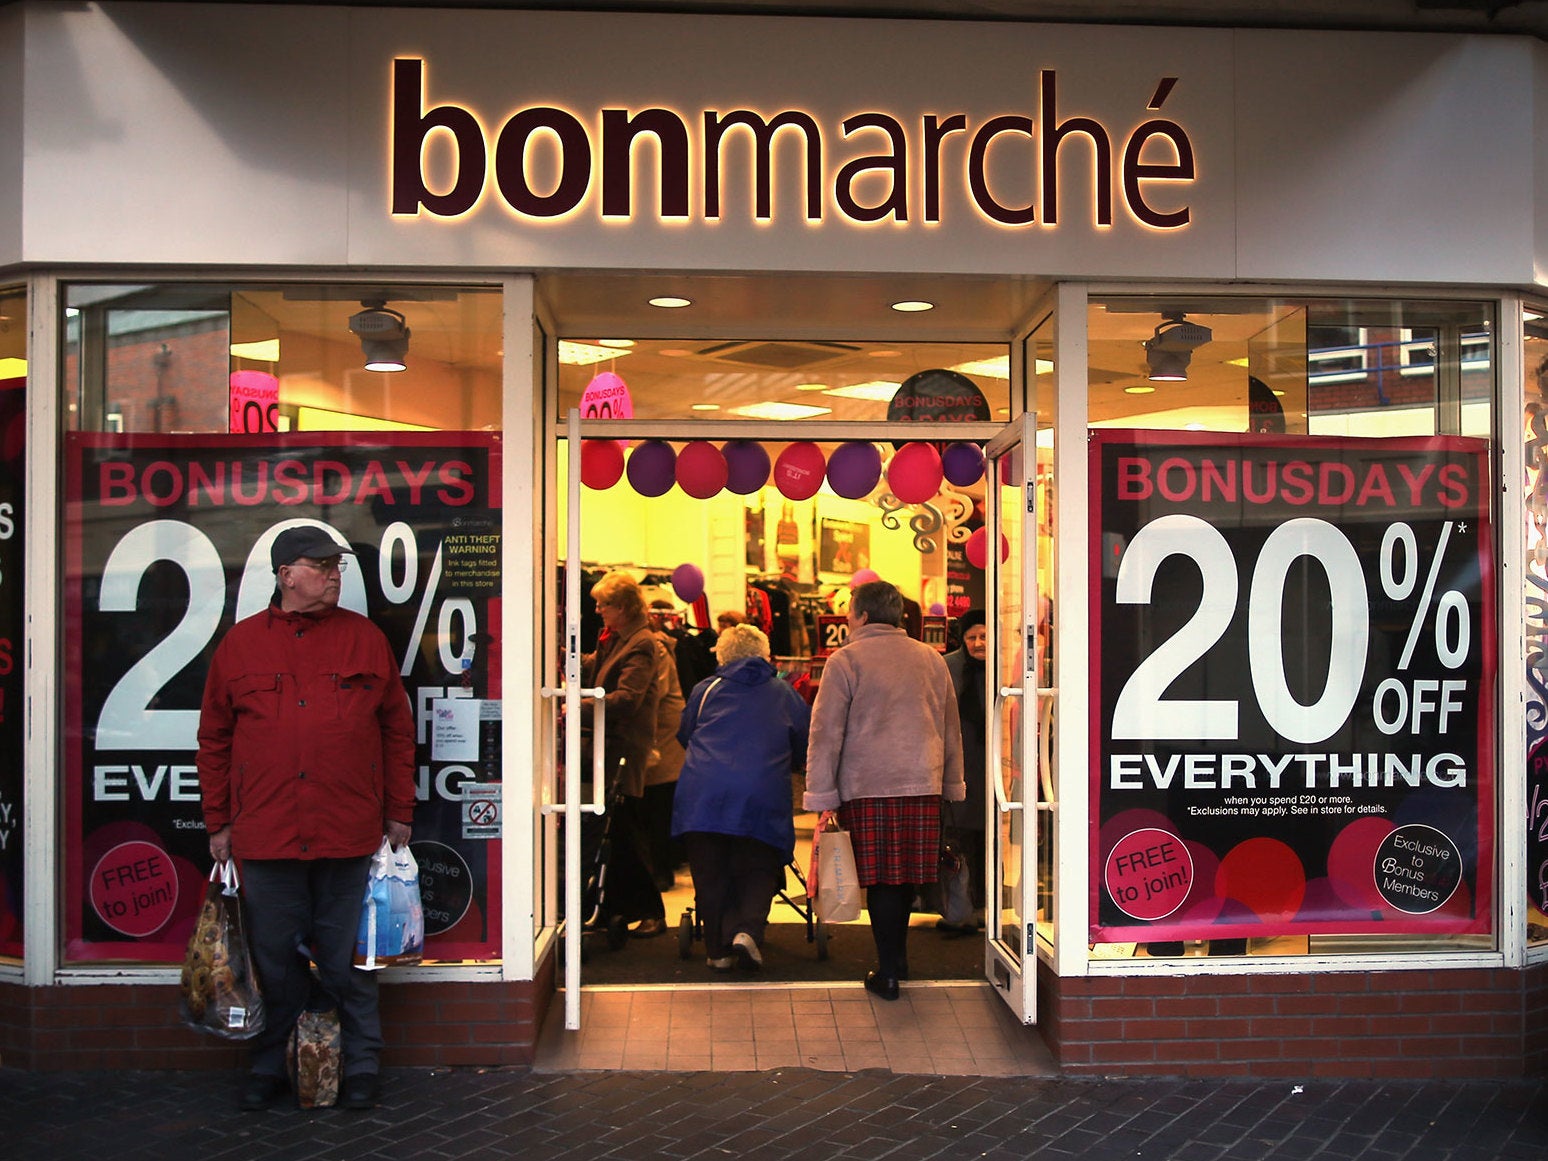 Fashion chain Bonmarché calls in administrators, Retail industry